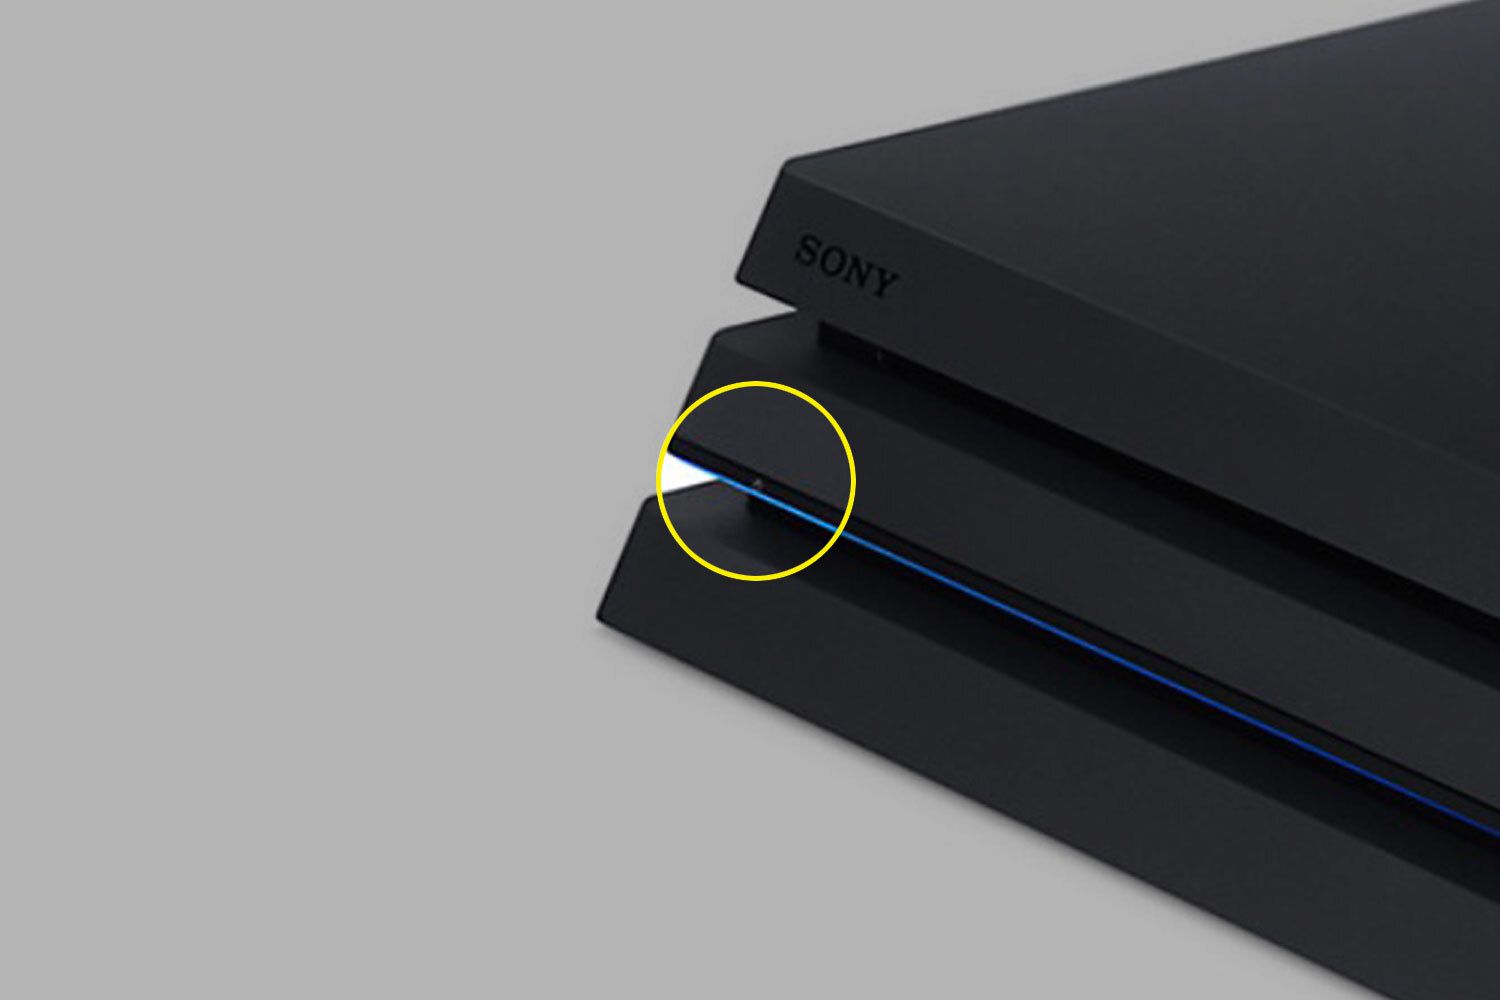 How To Turn On A Playstation 4